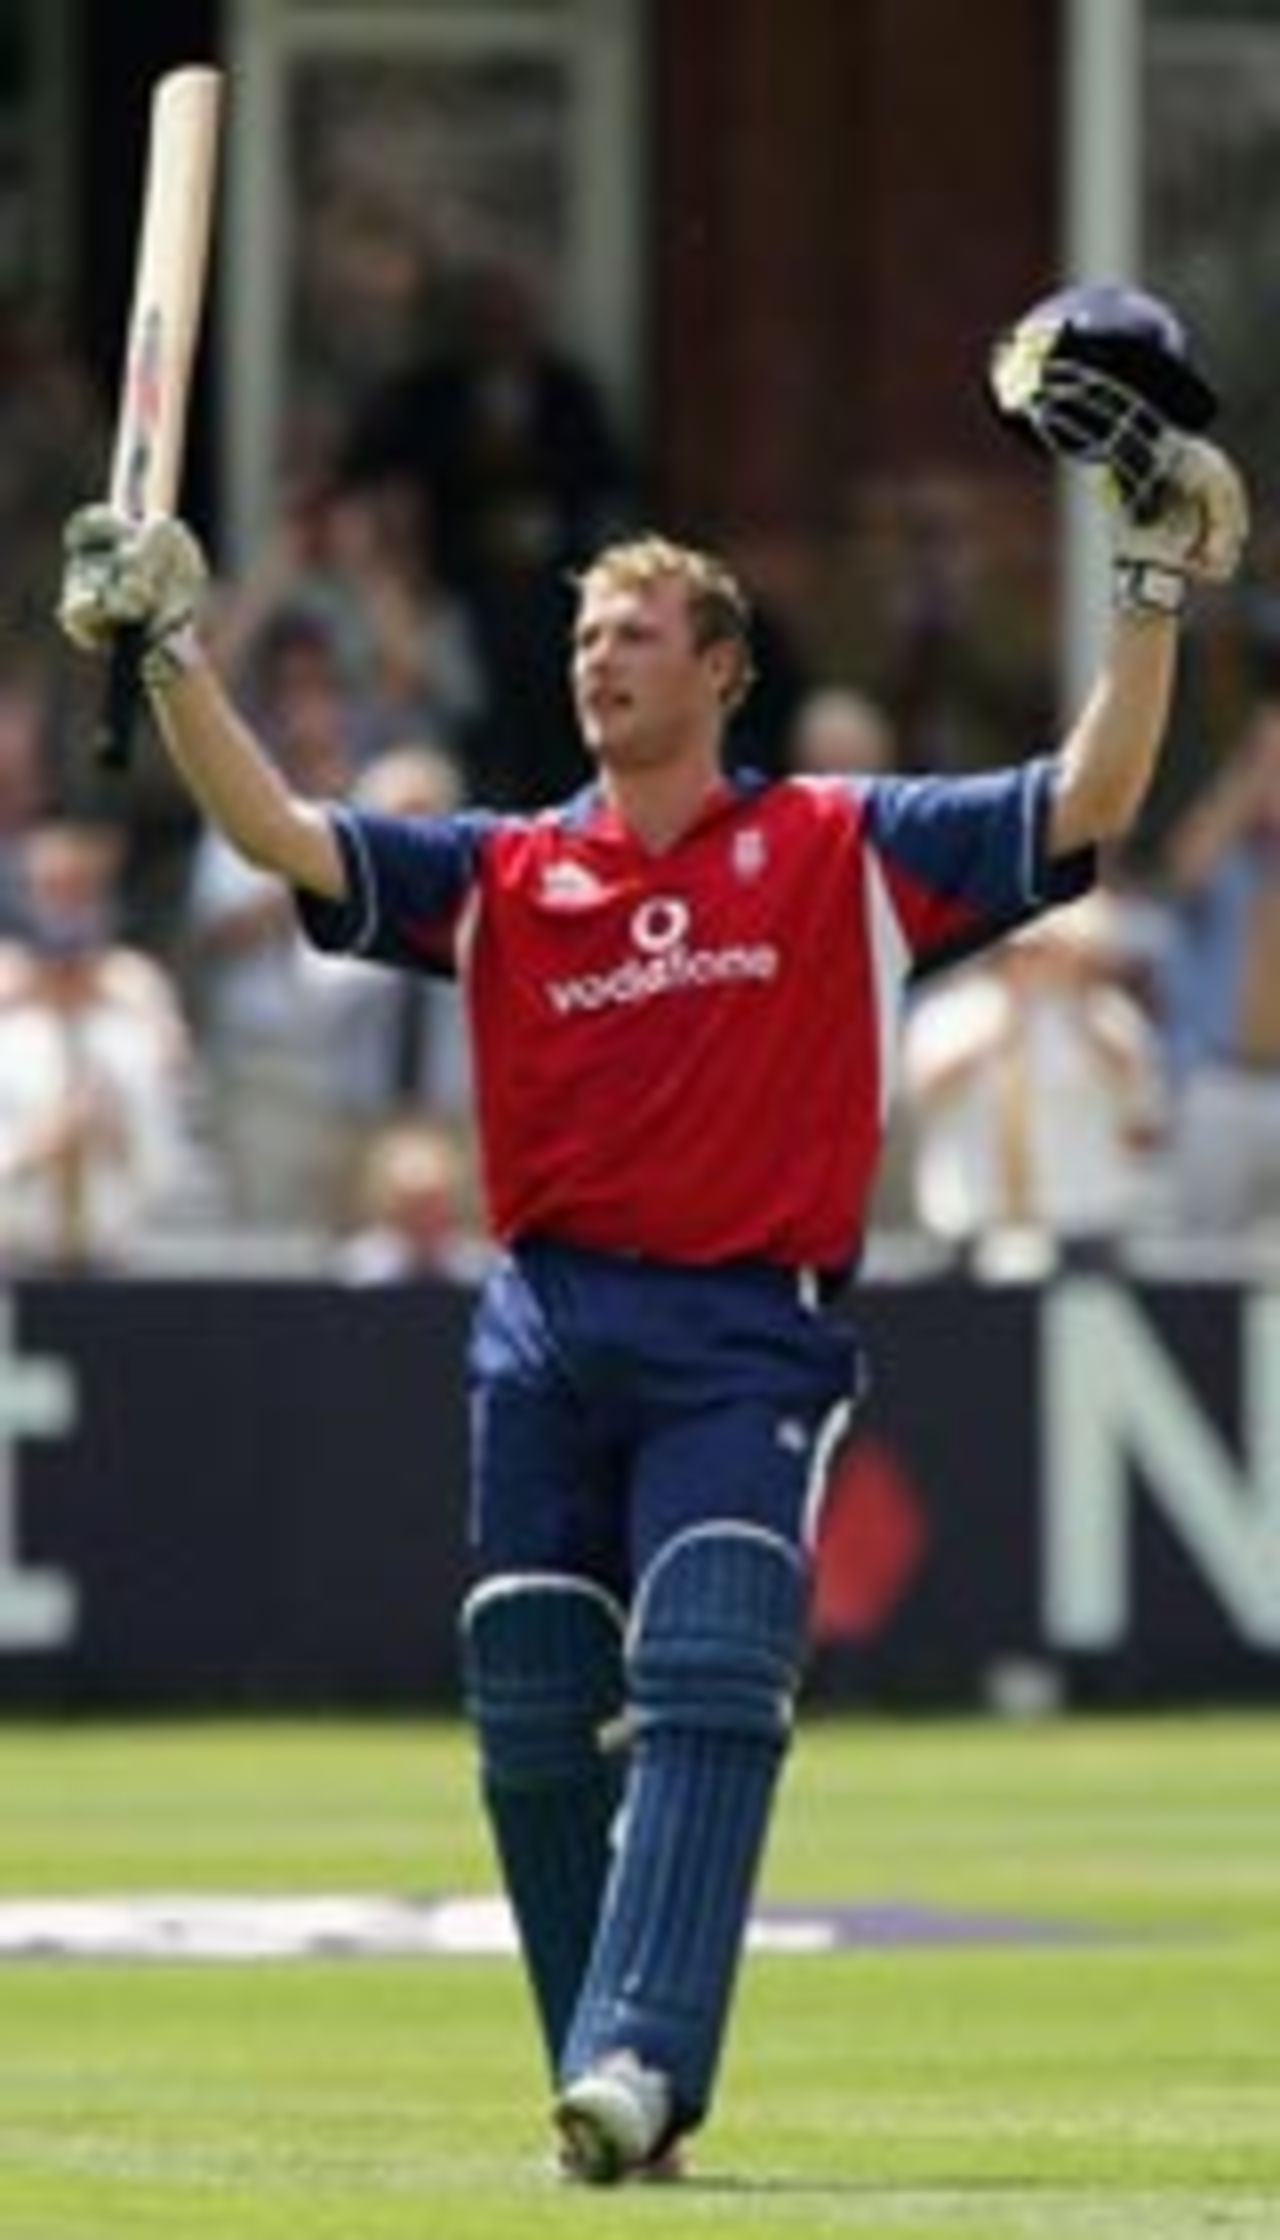 Andrew Flintoff celebrates his second consecutive one-day hundred, England v West Indies, NatWest Series, Lord's, July 6 2004